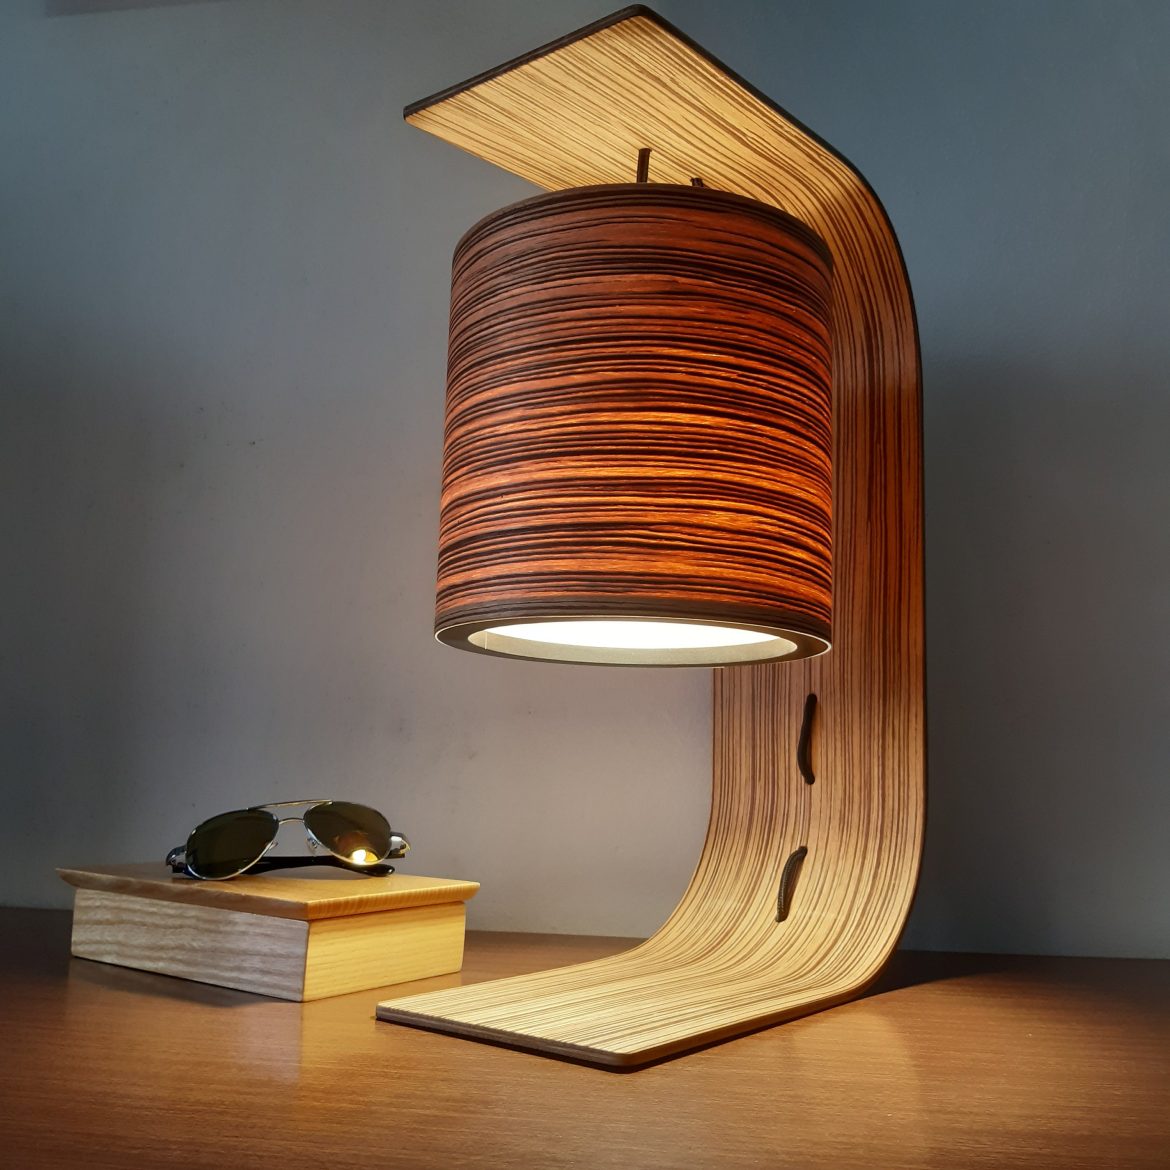 Lamp and Table in One: The Perfect Space-Saving Solution for Your Home